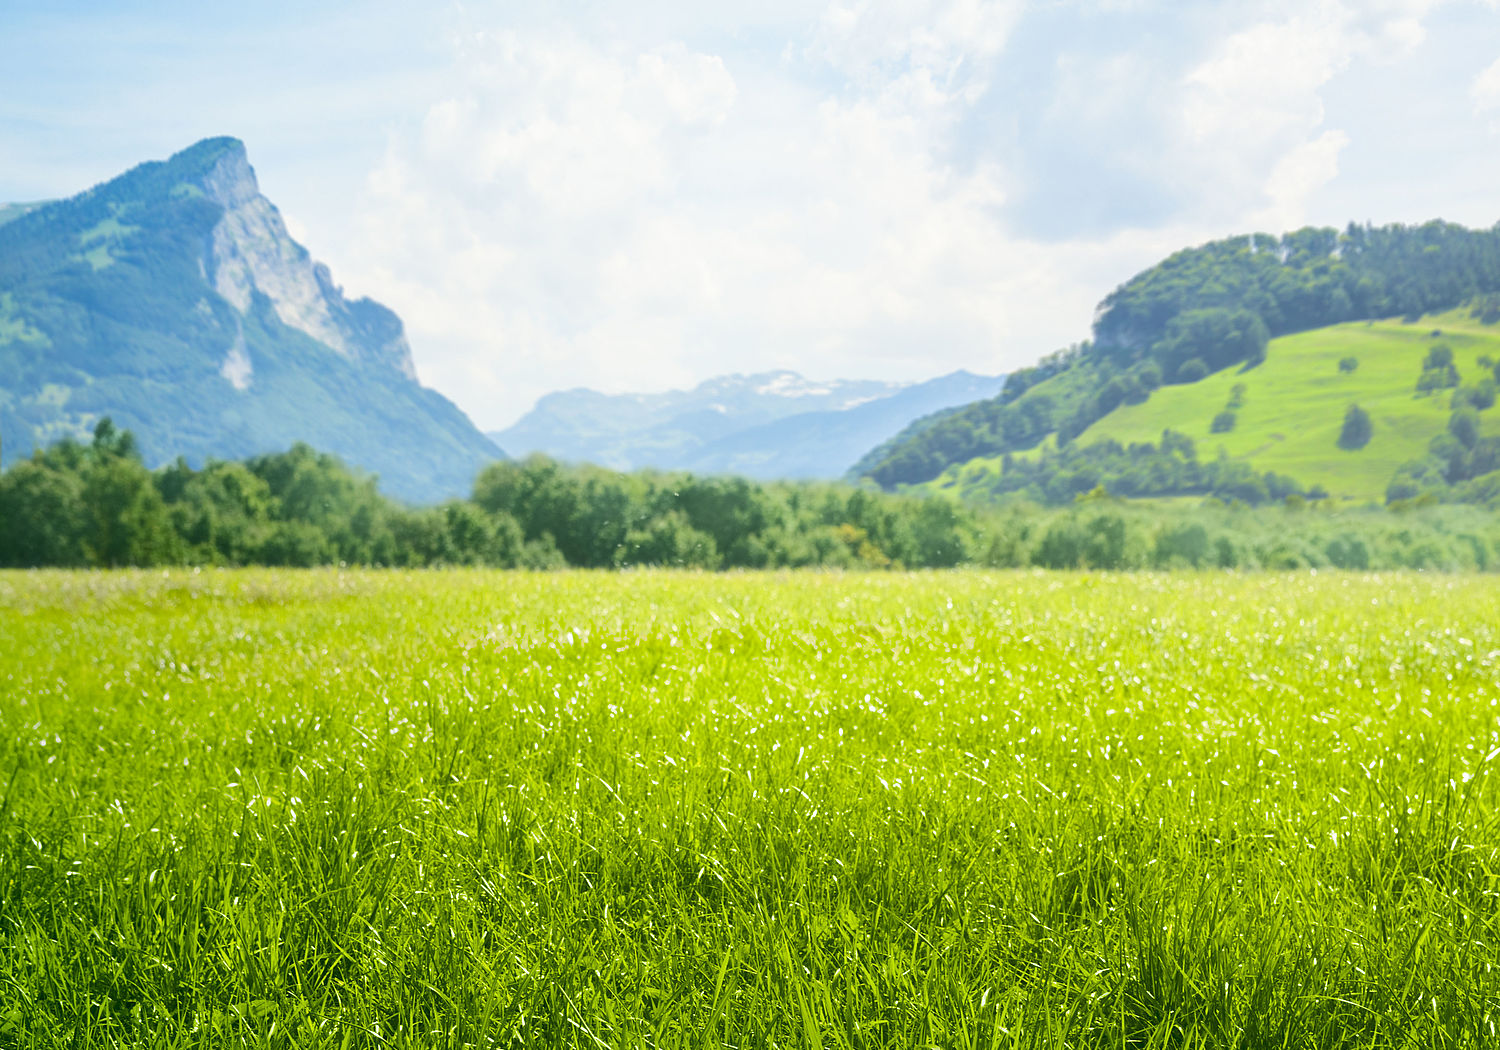 Image showing a bright green meadow with mountains in the distance